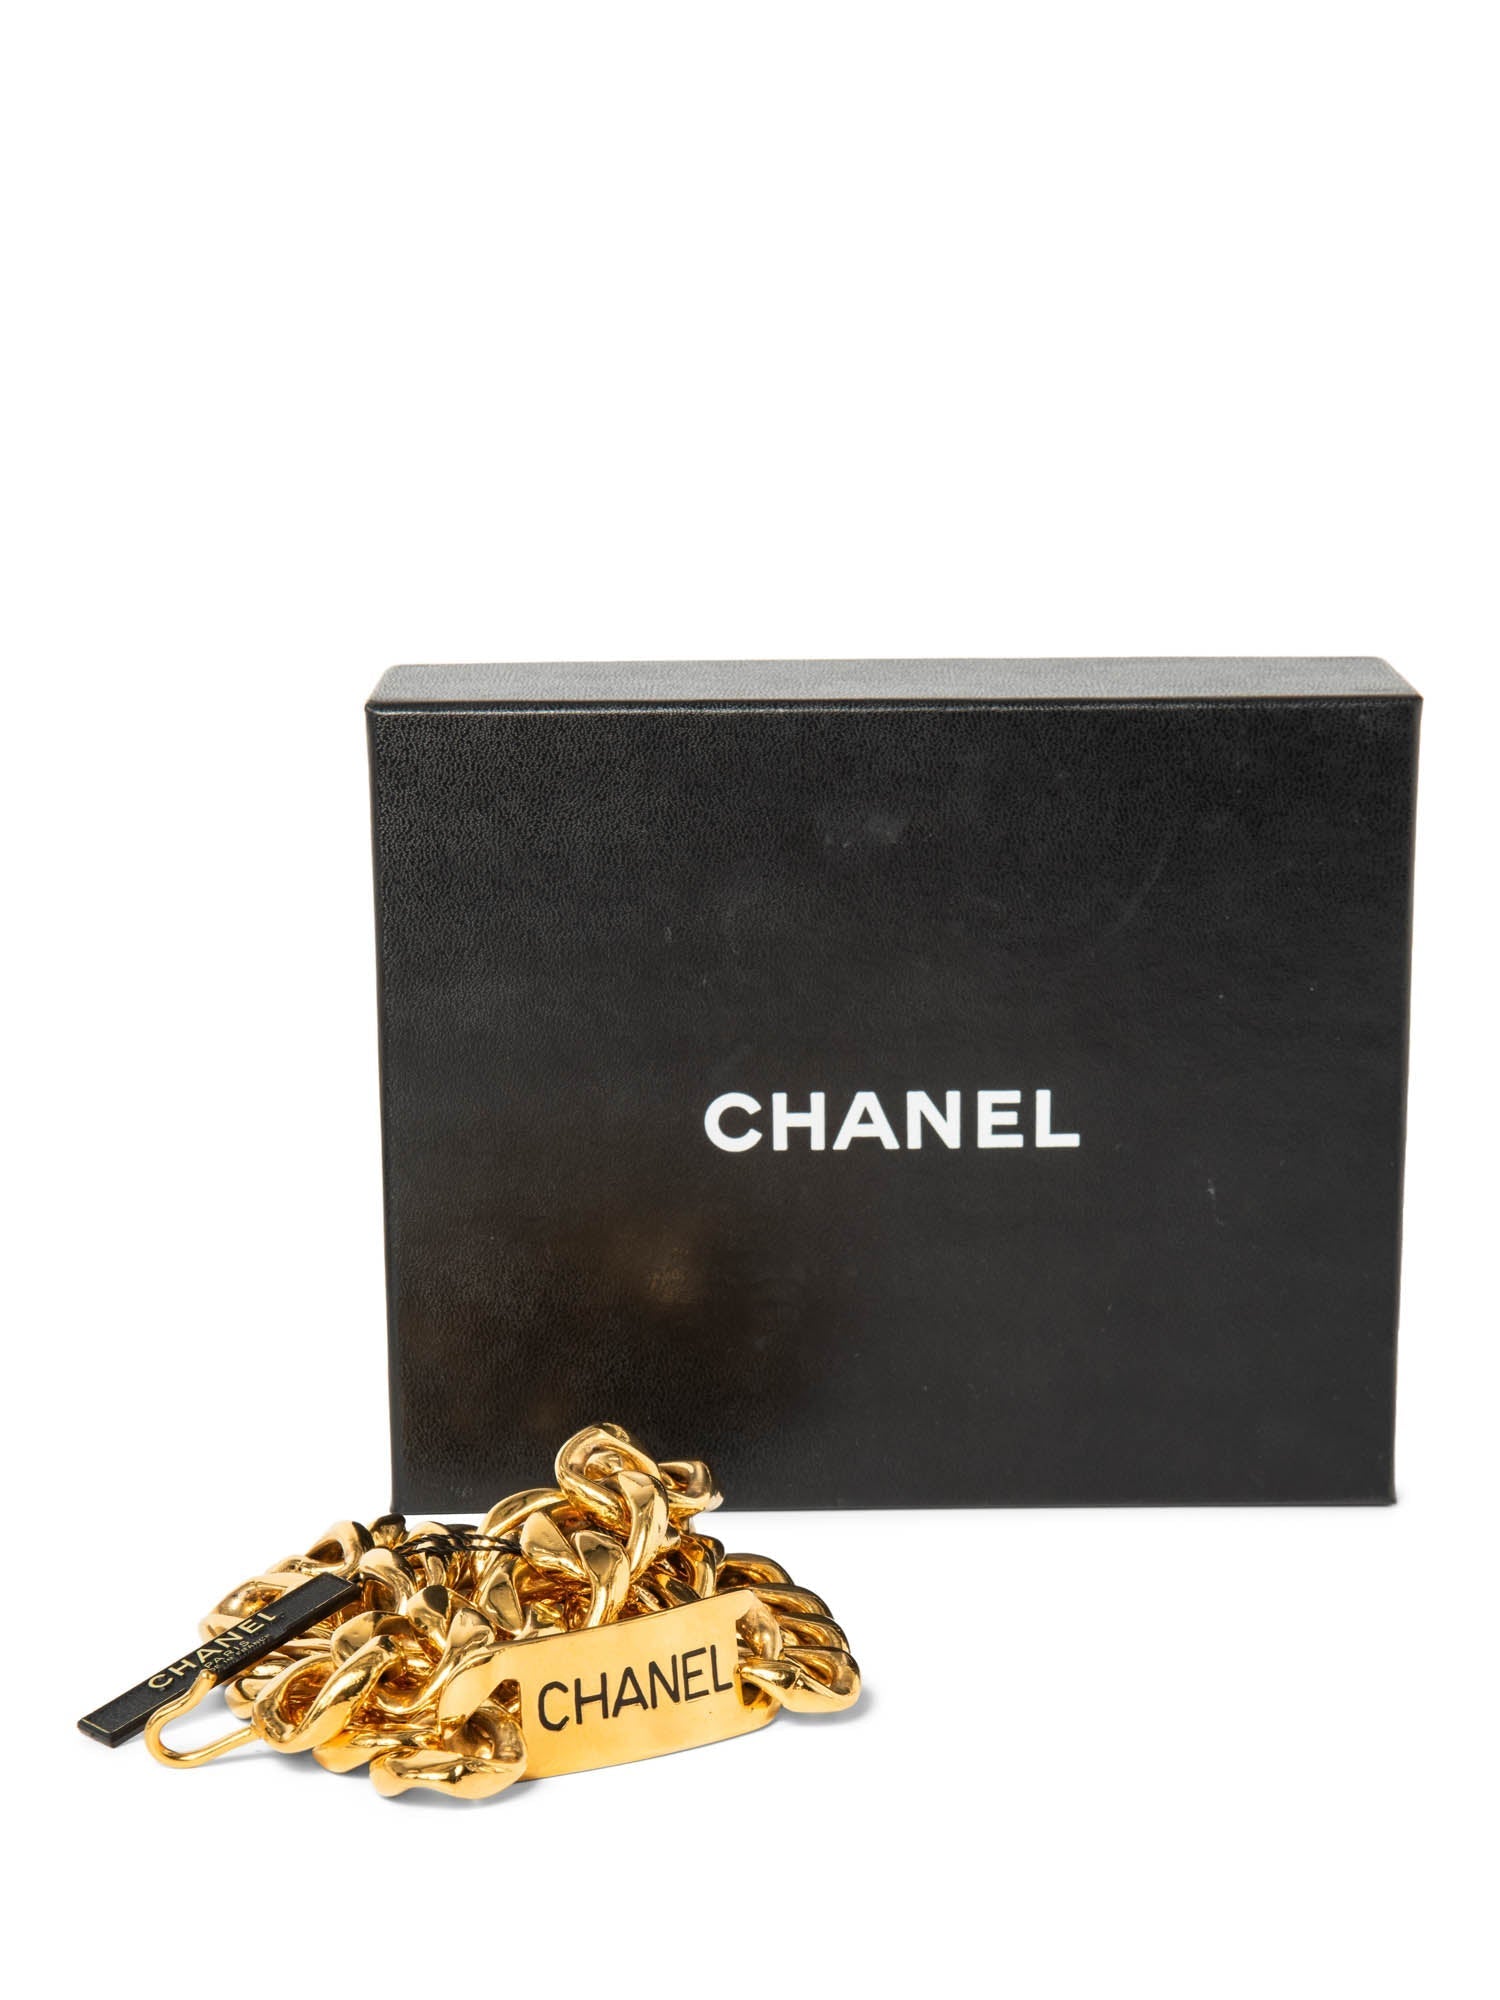 CHANEL Logo 24K Gold Plated Chunky Chain Belt